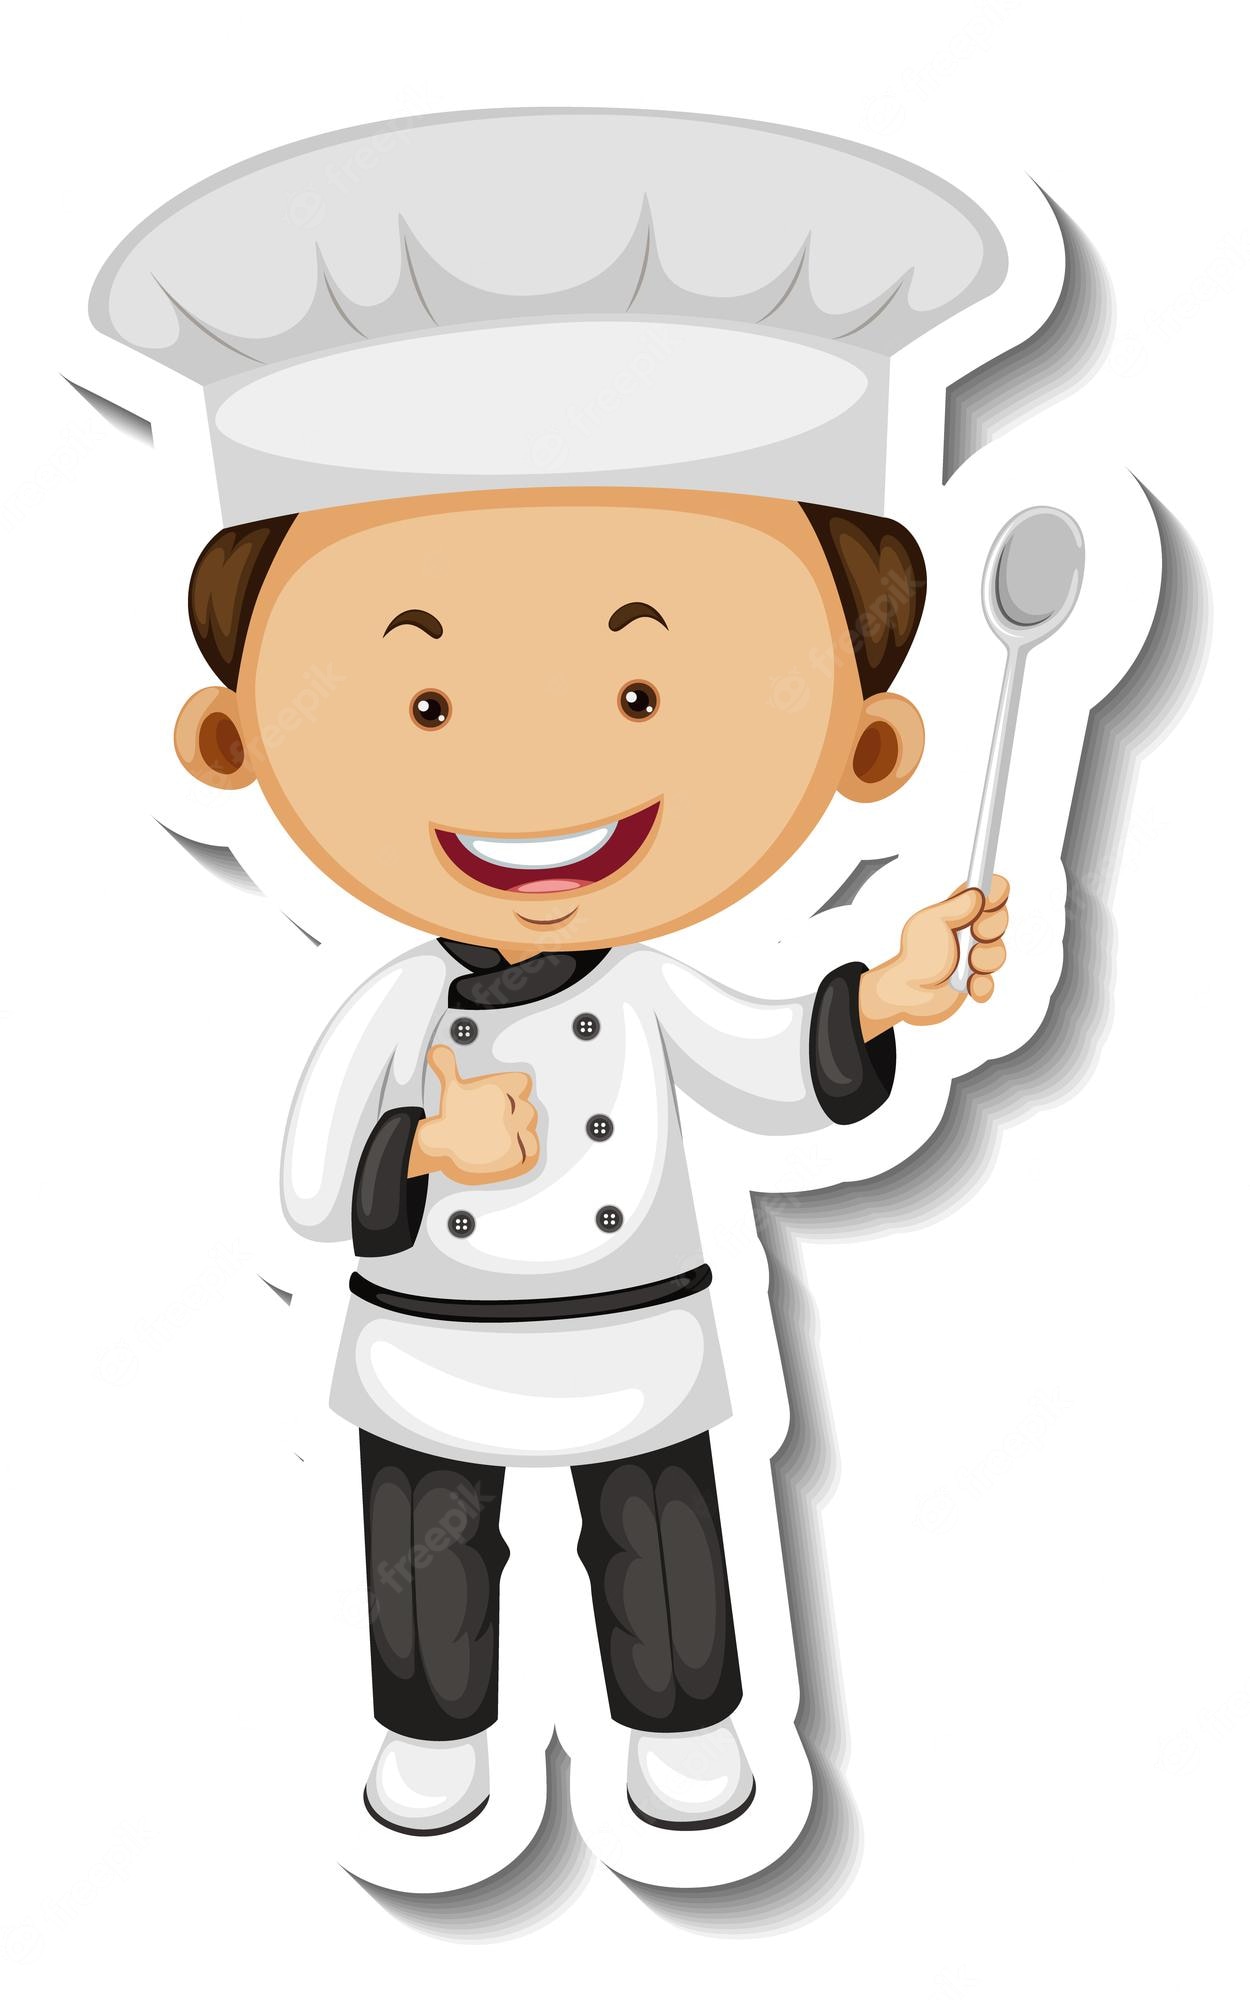 Sticker Template With Chef Boy Cartoon Character Isolated 1308 63002 